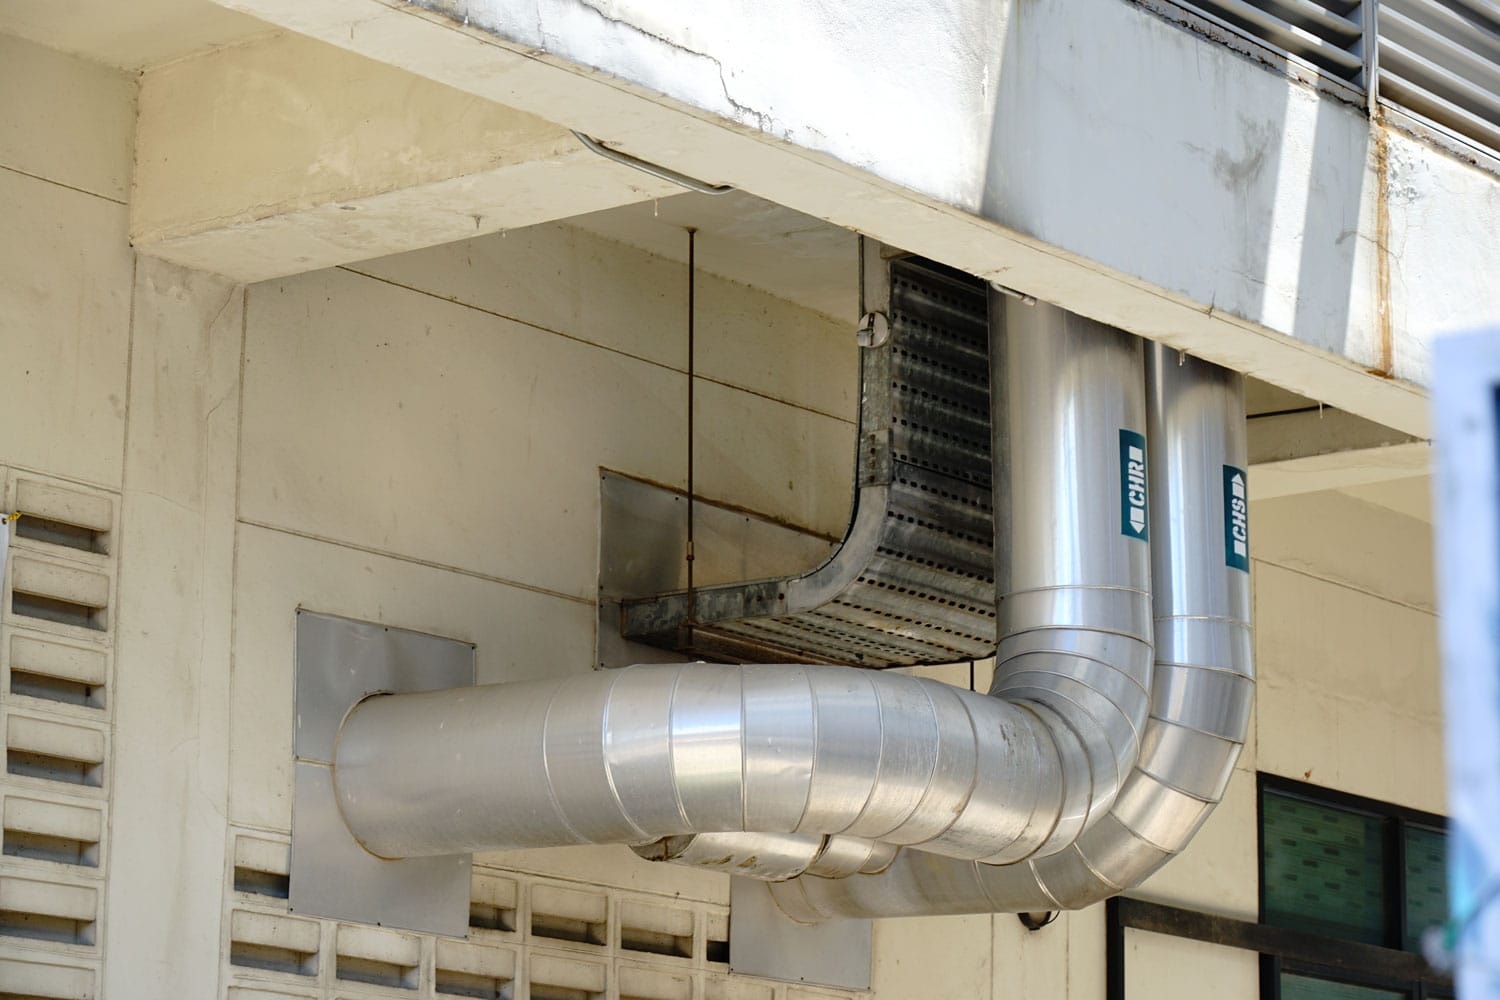 An air conditioning unit exhaust photographed outside a building